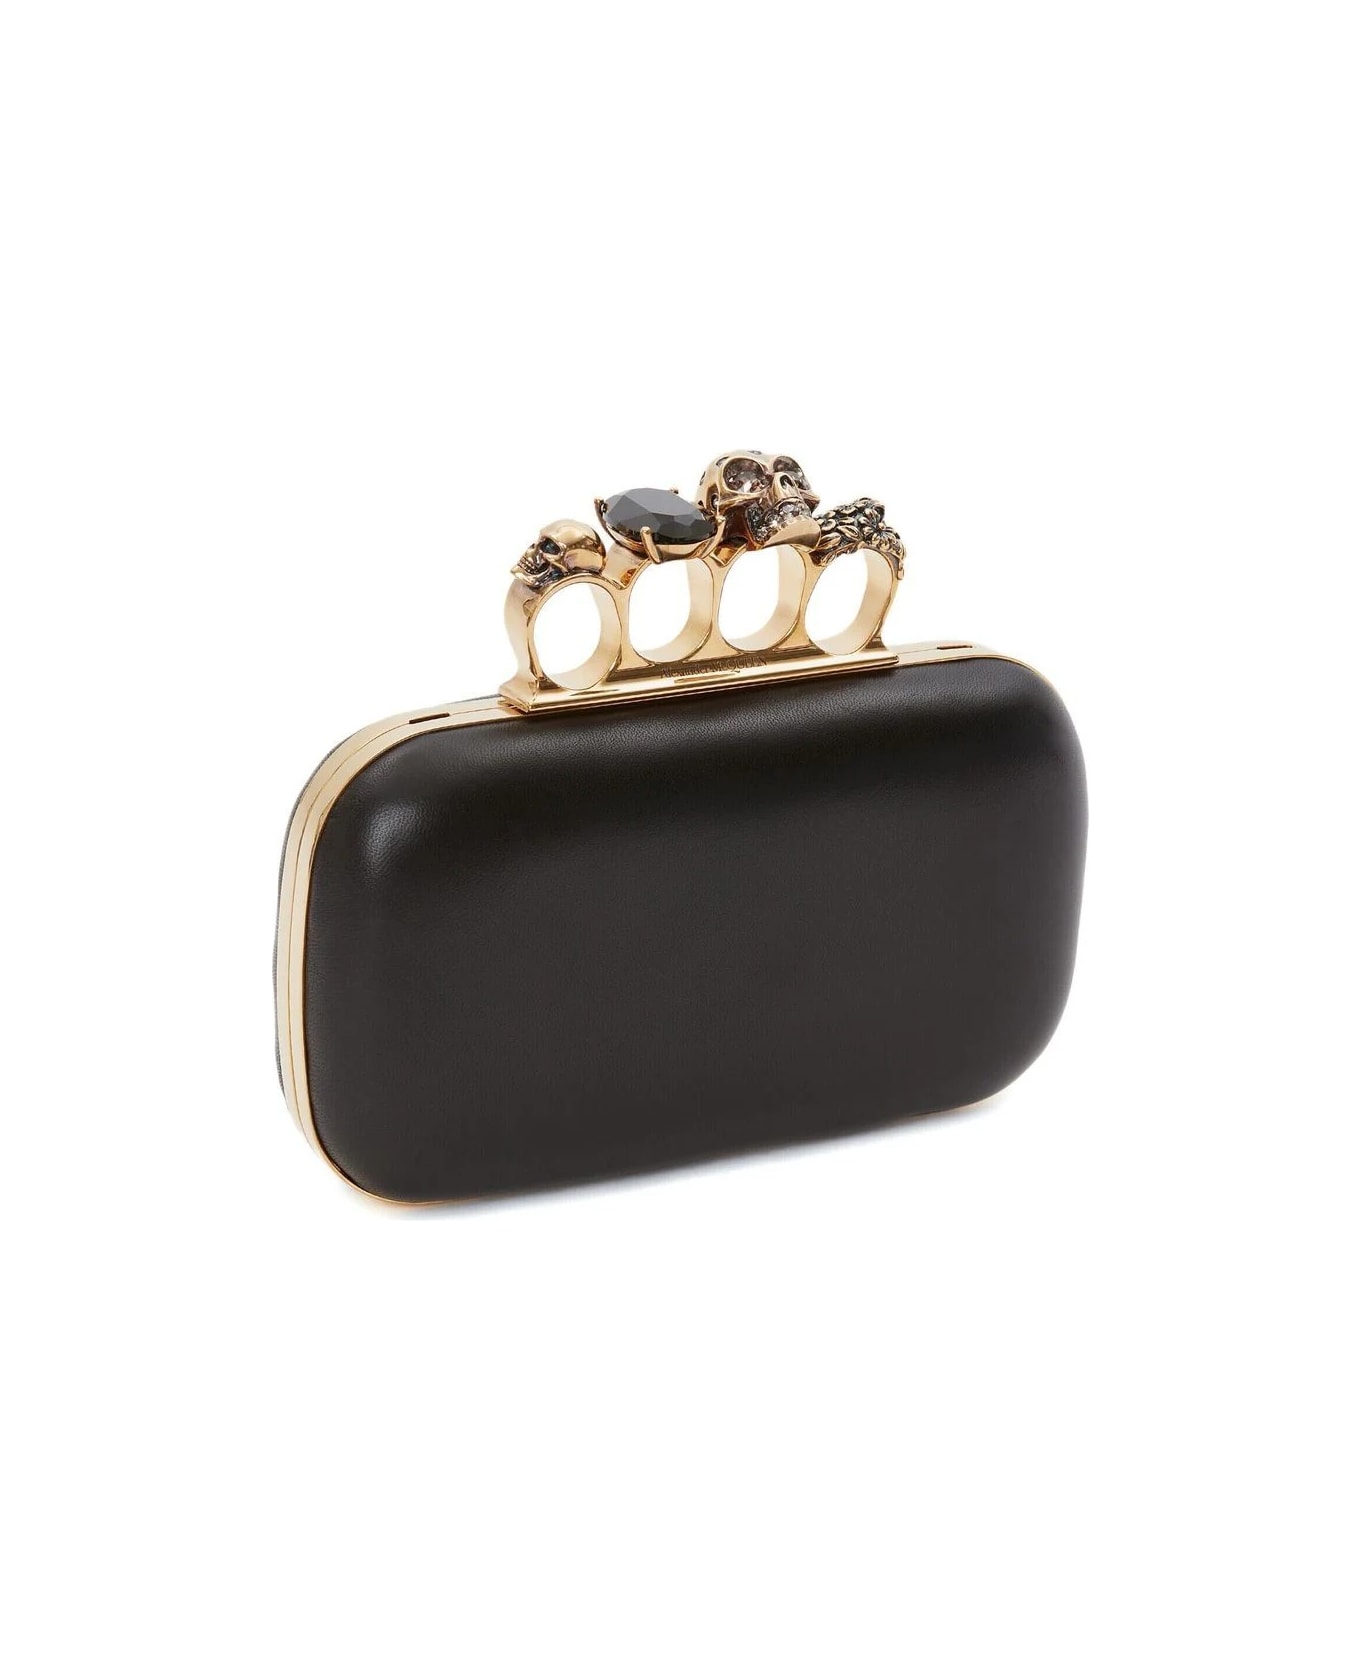 Alexander McQueen Knuckle Clutch With Chain In Black - Black クラッチバッグ